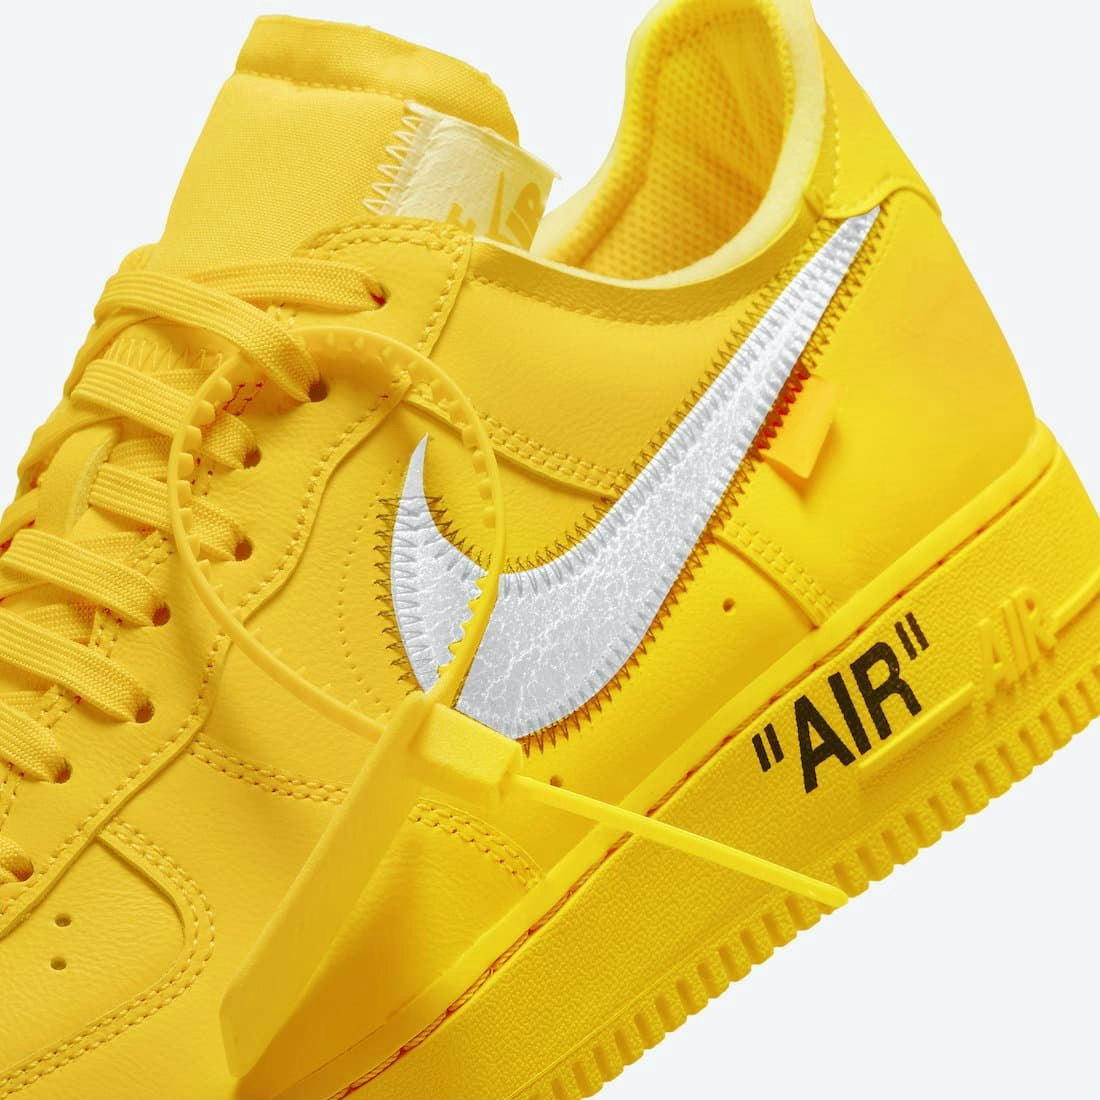 Nike x Off-White Air Force 1 “University Gold”